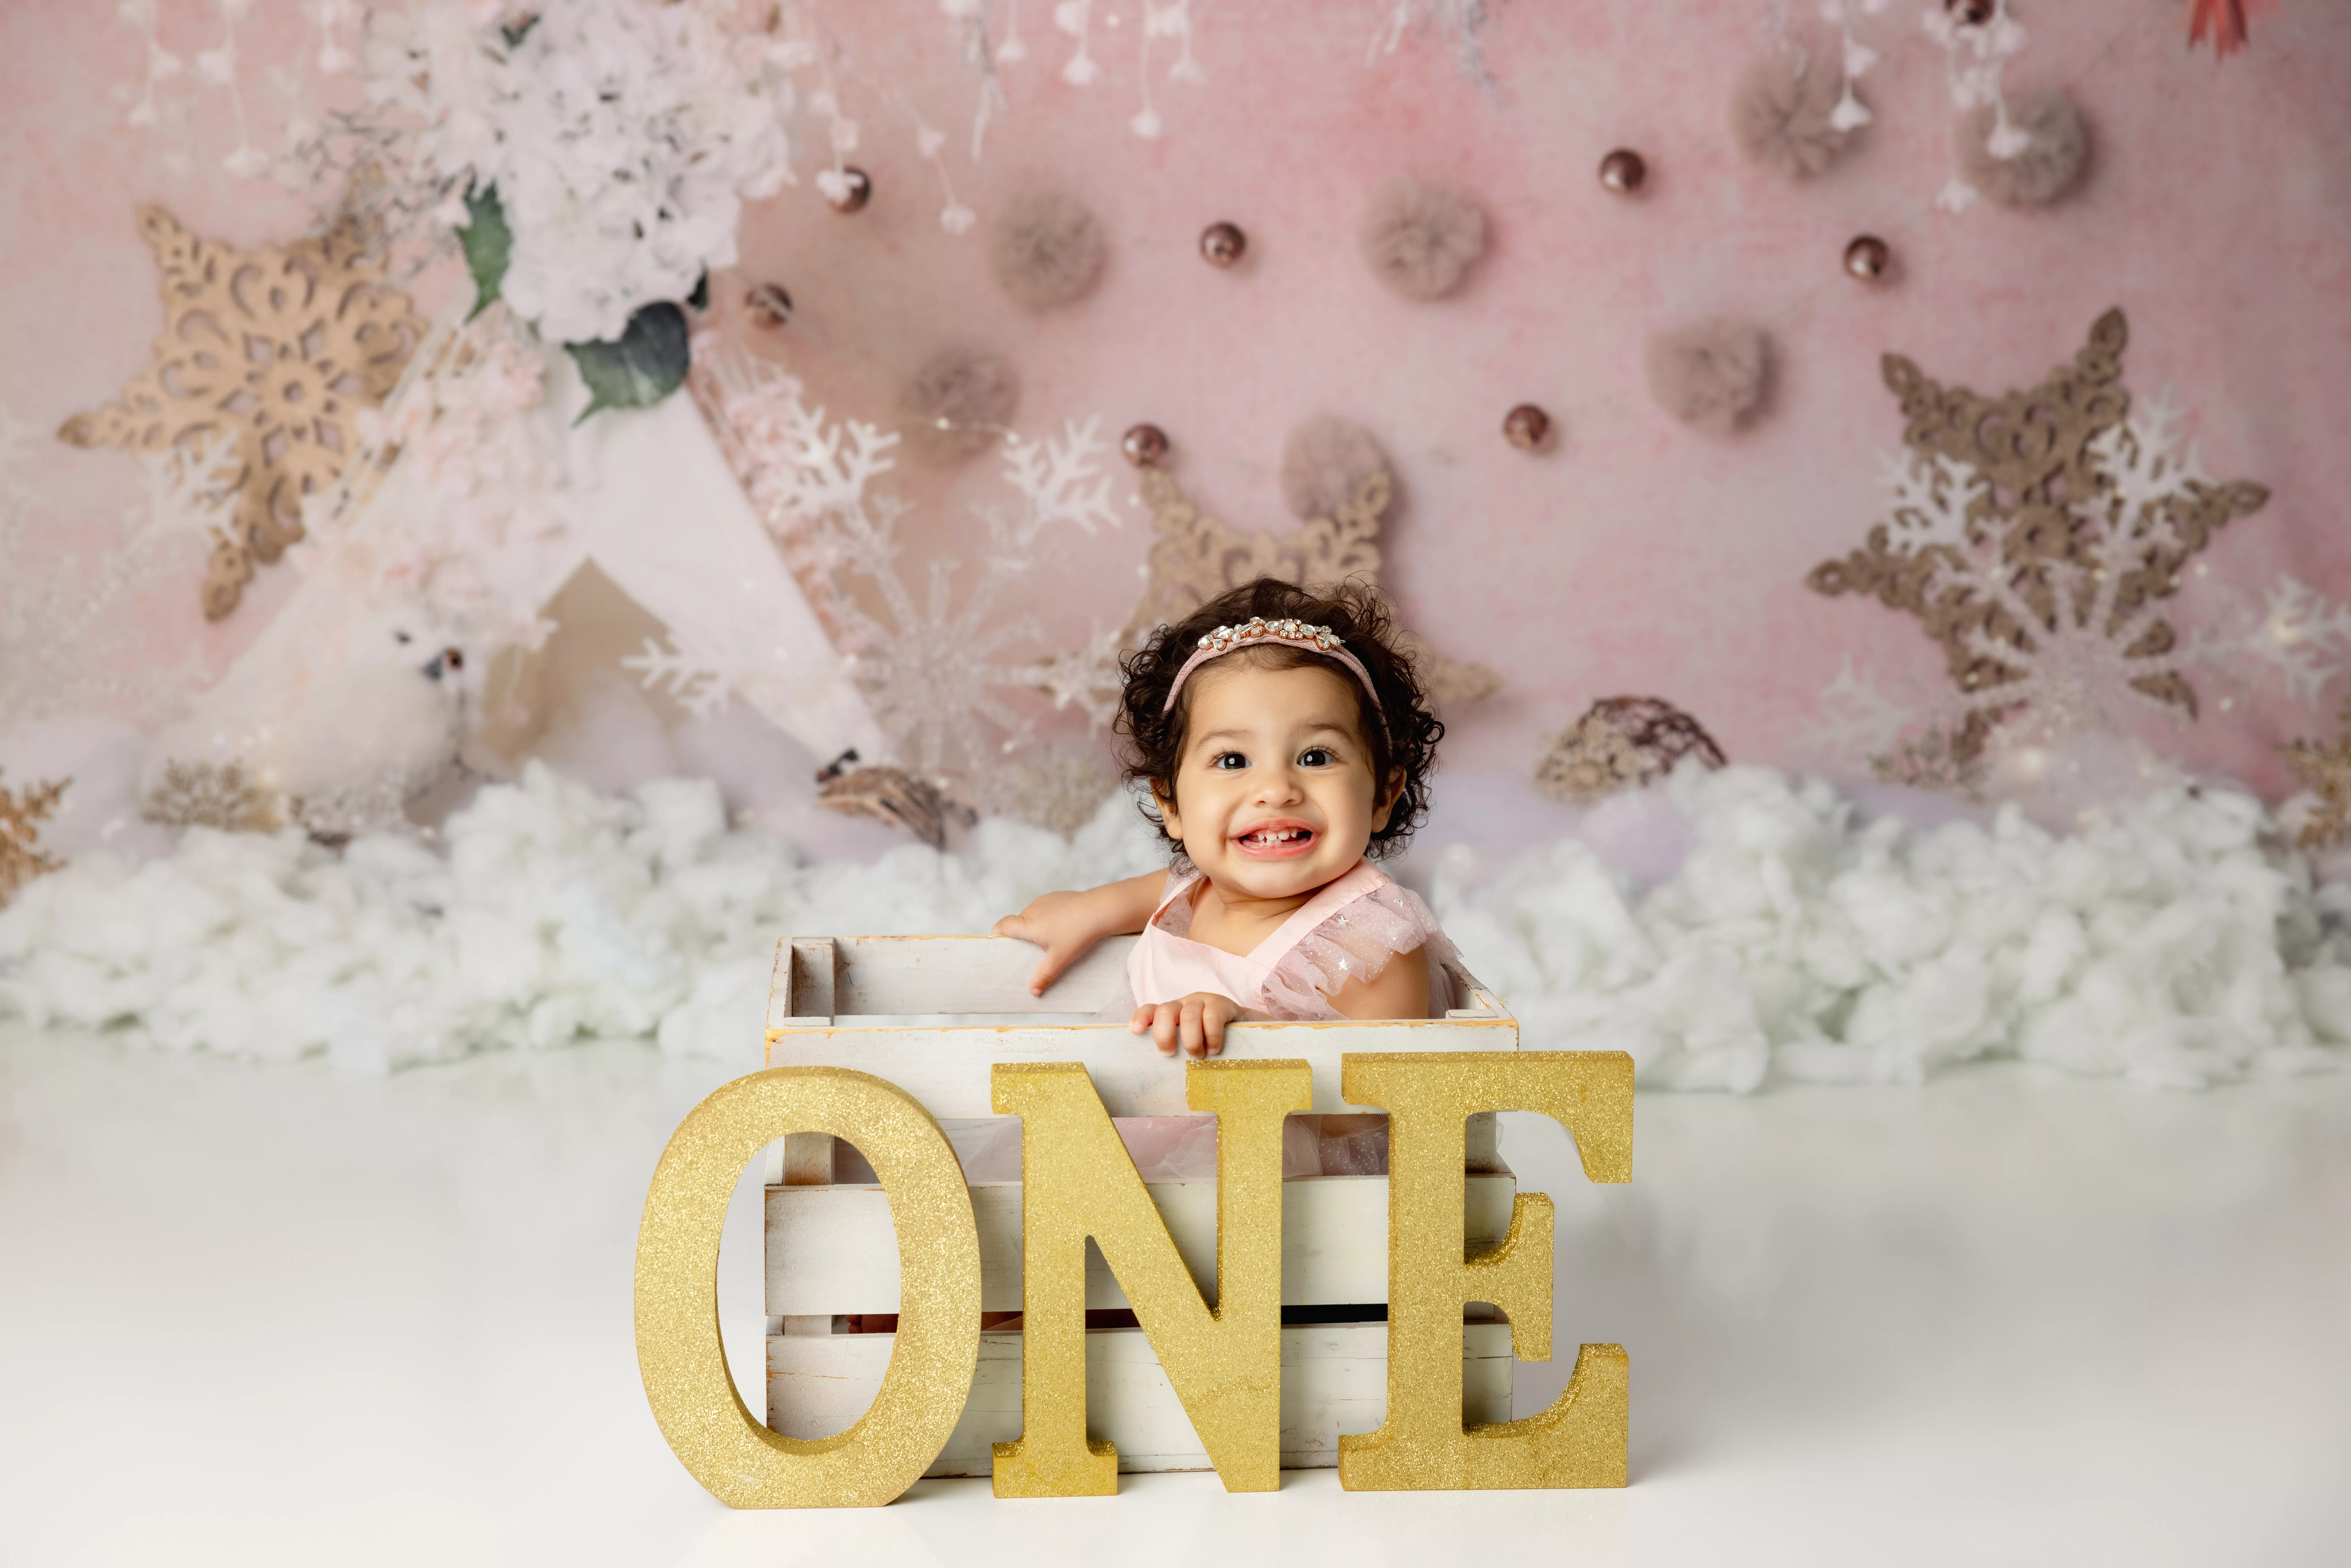 Orlando Girl Cake Smash 1st Birthday Photographer Photo Studio winter onederland snowflakes gold white pink one letters crate christmas